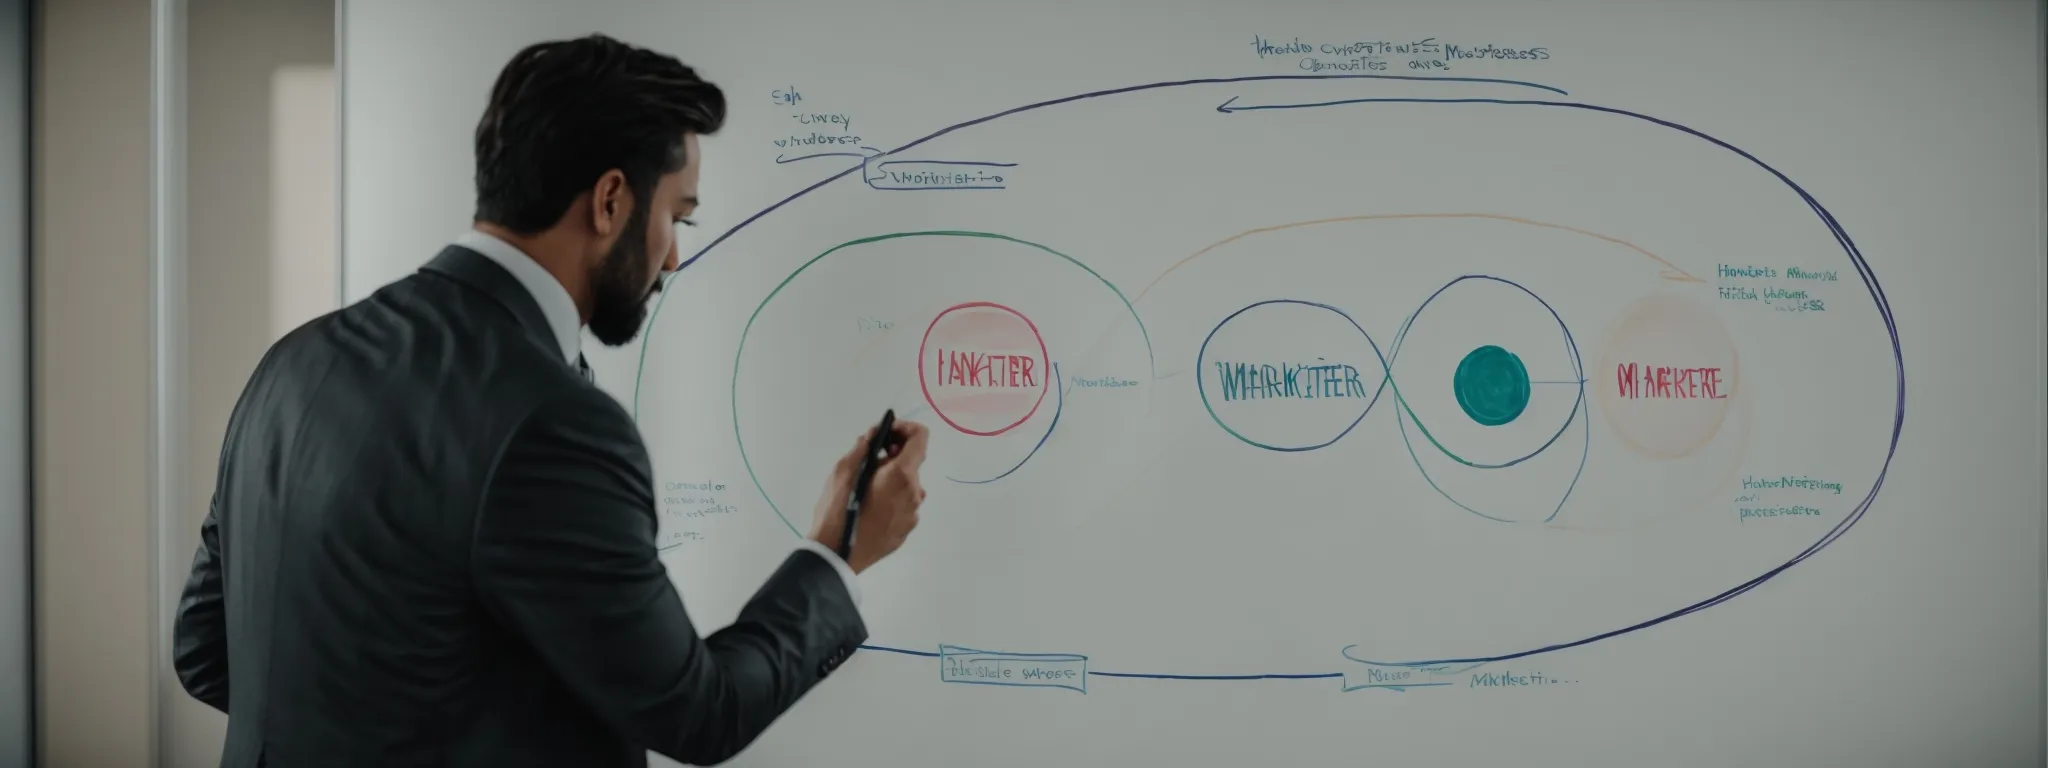 a marketer draws a venn diagram on a whiteboard to illustrate the overlap between traditional and digital marketing strategies.